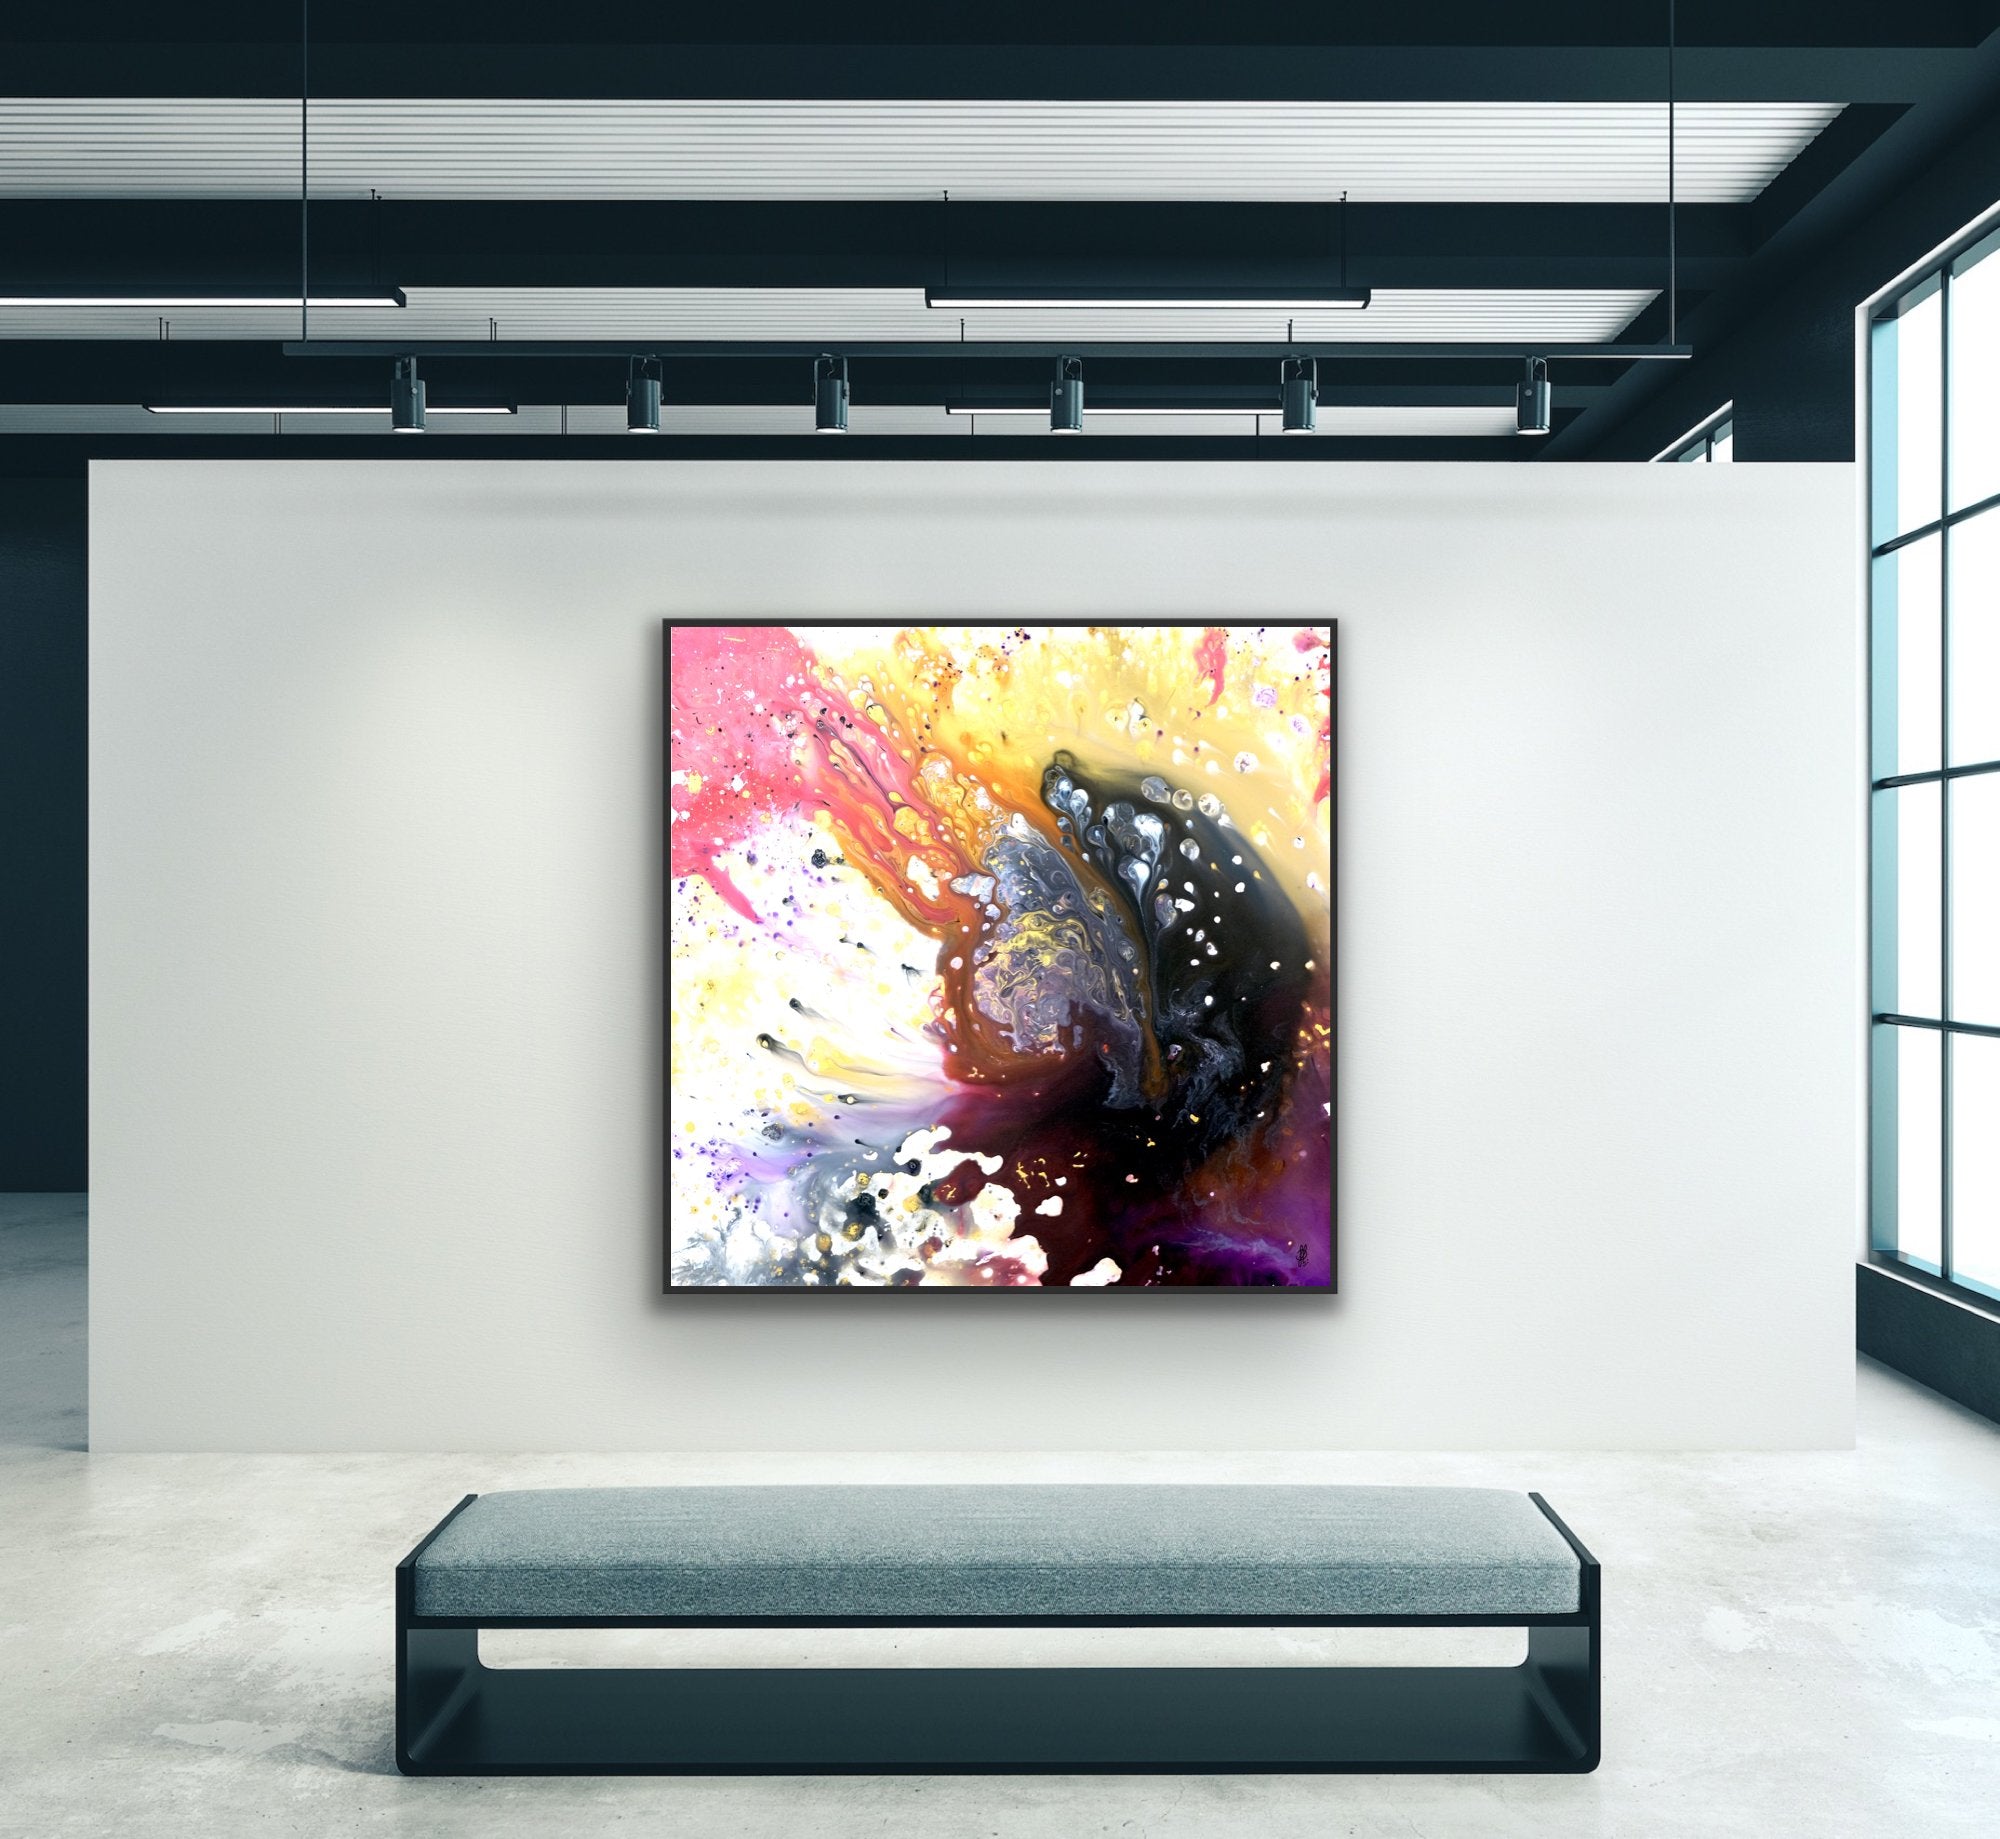 Canvas print: "Red Flow"